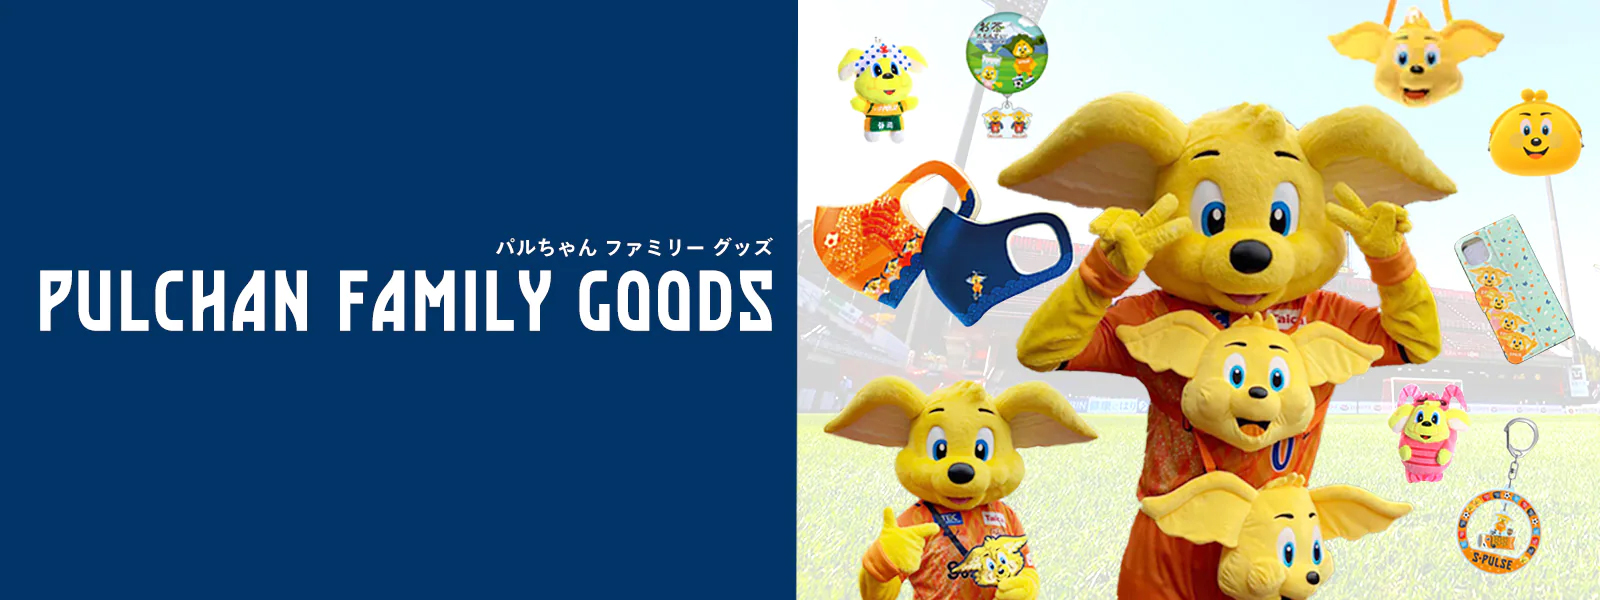 PULCHAN FAMILY GOODS